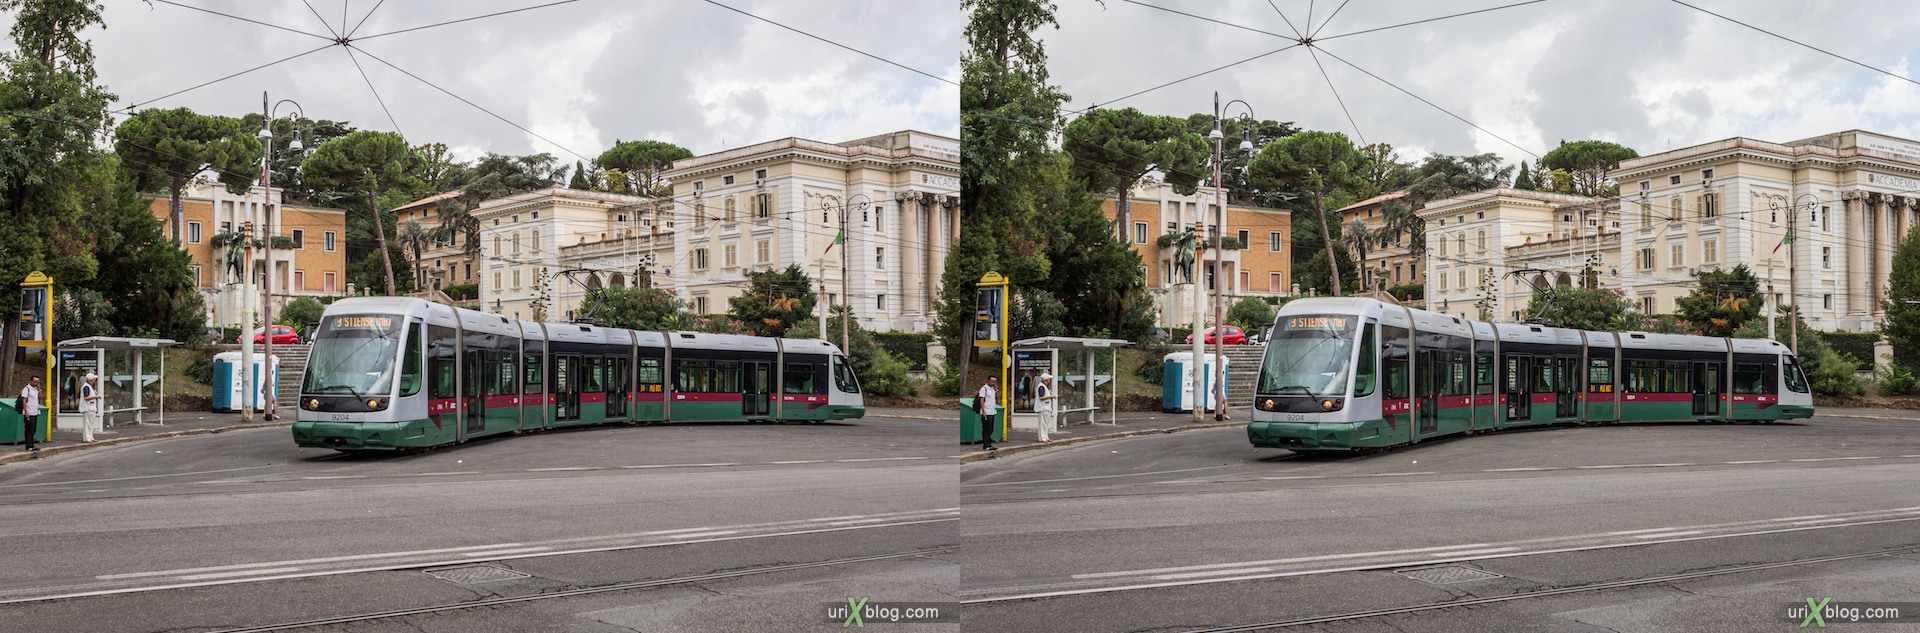 2012, Piazza Thorvaldsen square, tram, villa Borghese, 3D, stereo pair, cross-eyed, crossview, cross view stereo pair